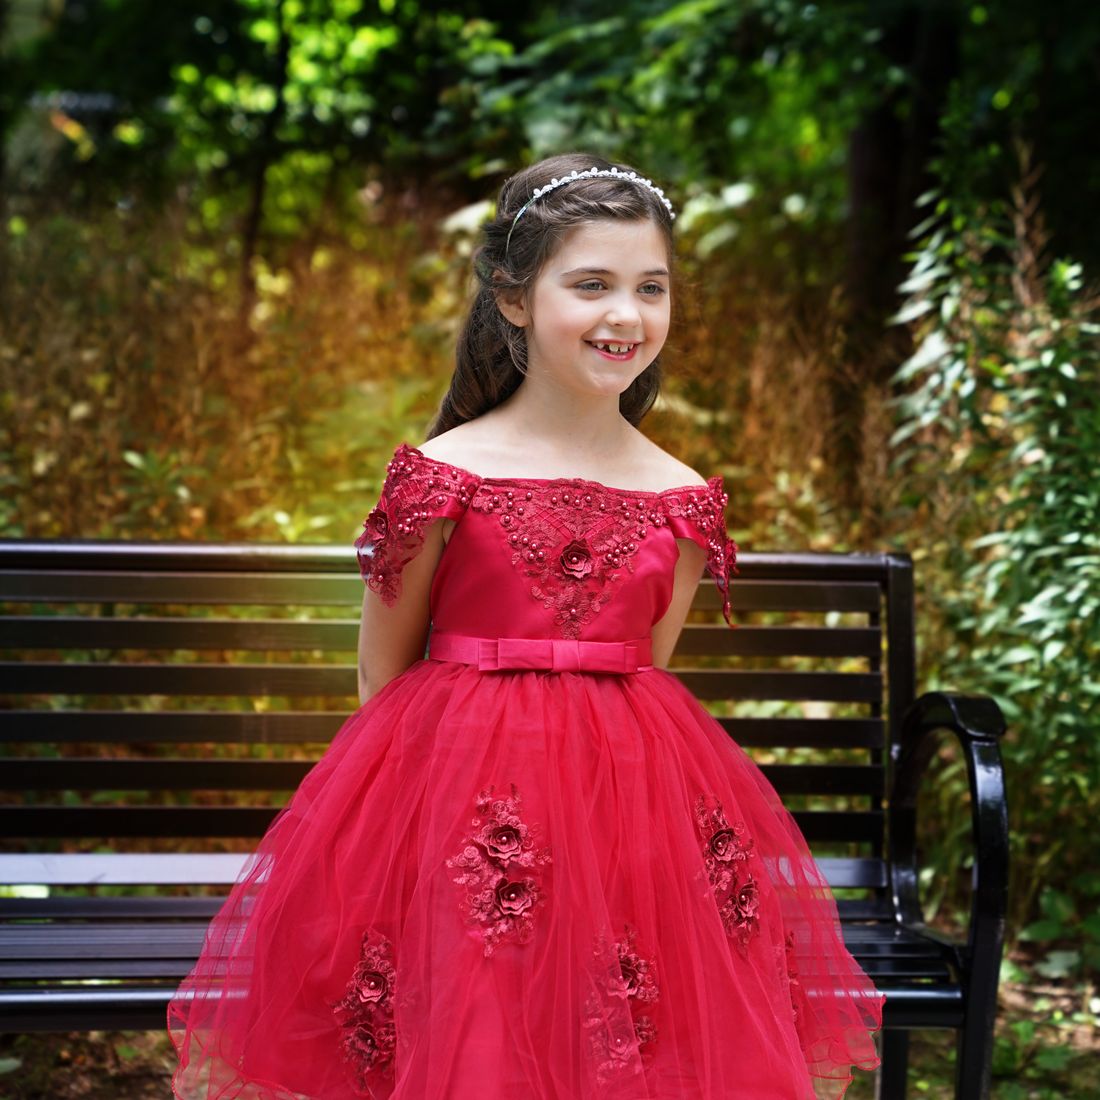 Red Flower Girl Dresses For A Romantic Valentine's Day Wedding - Princessly